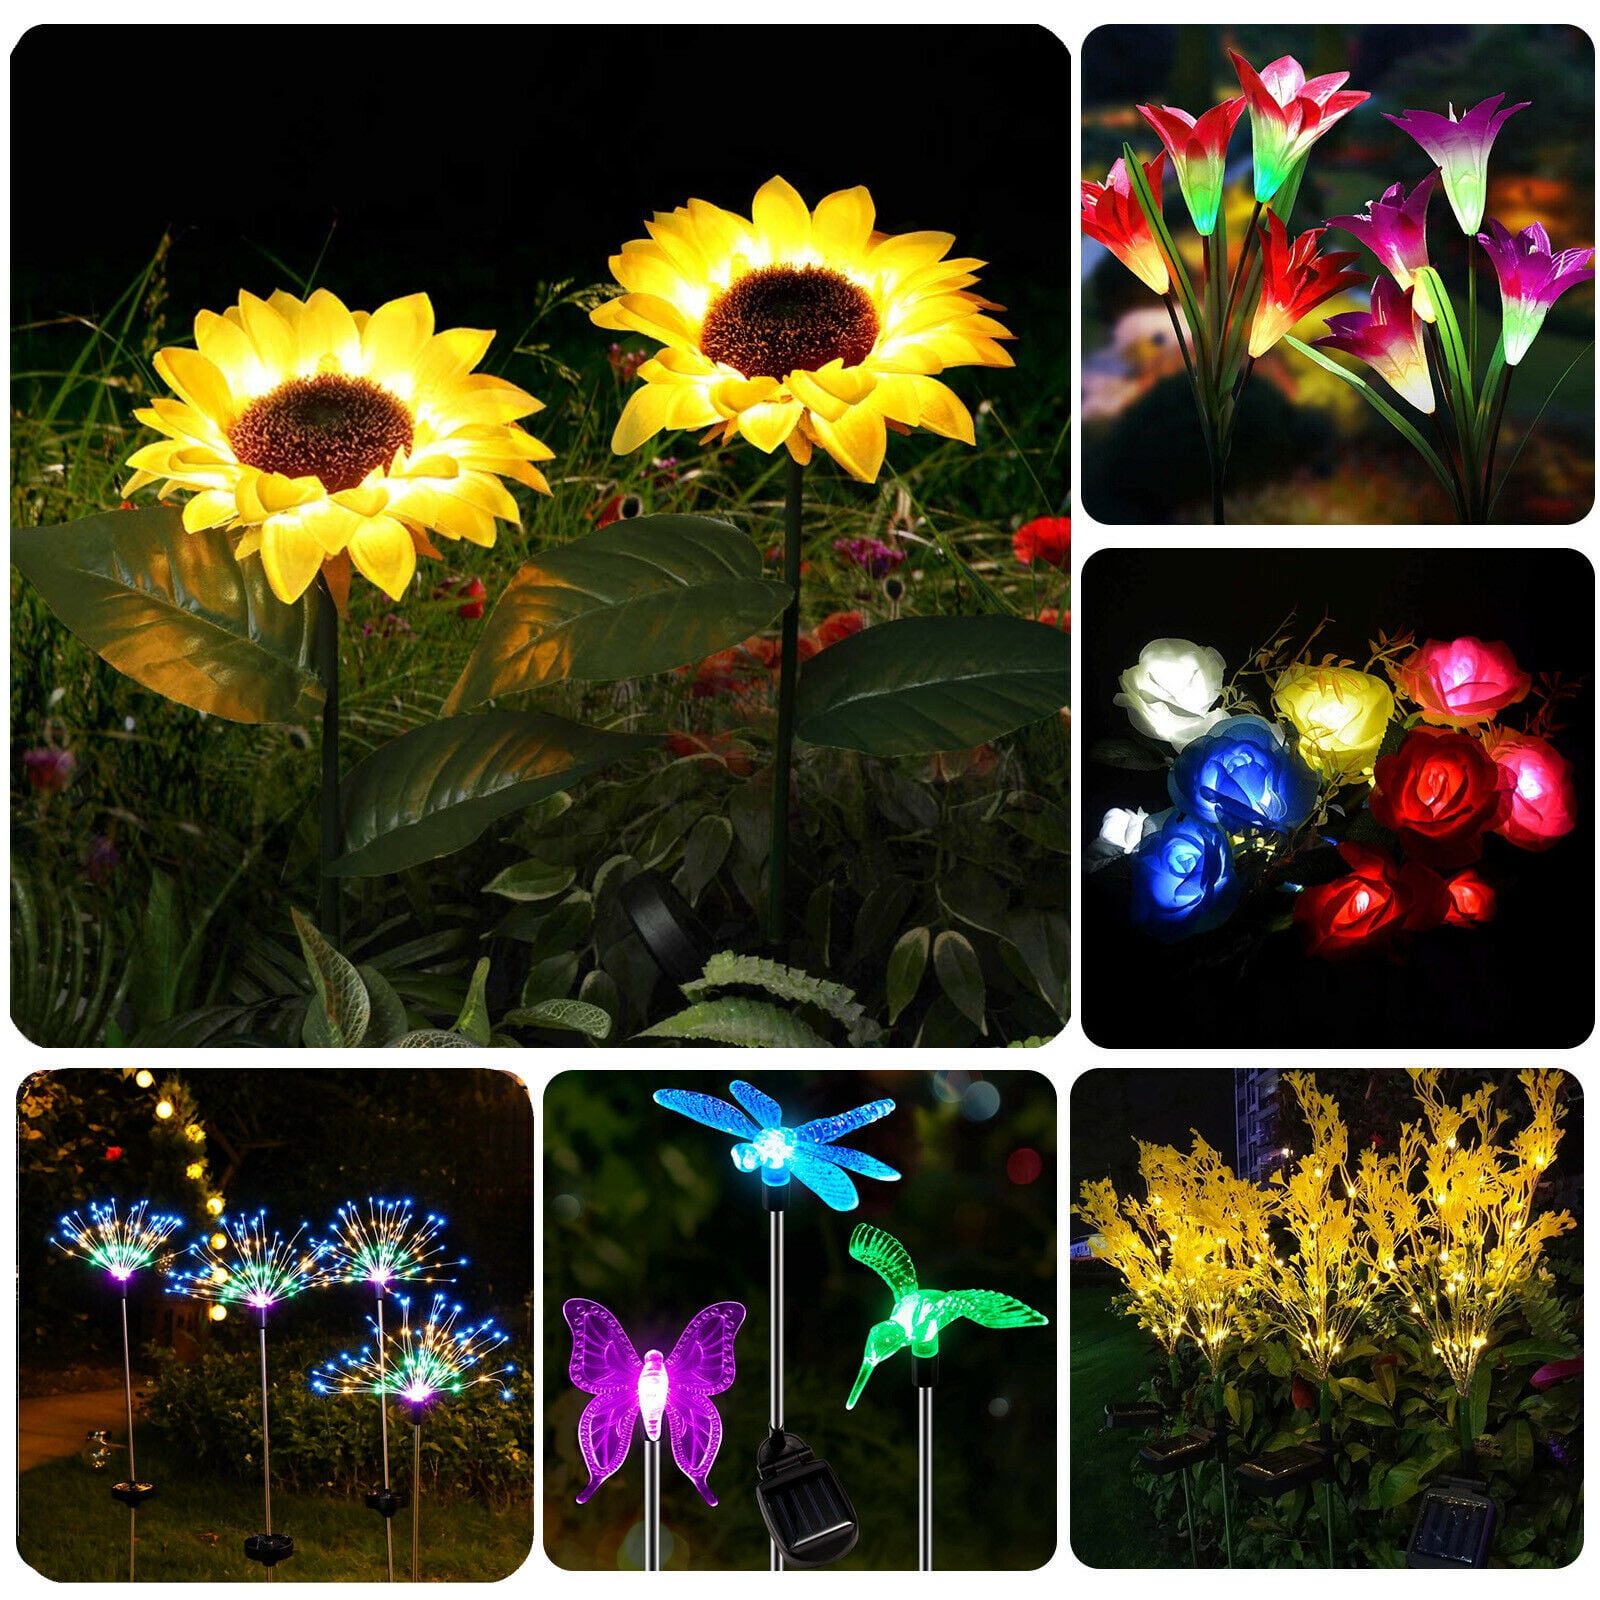 Pathway Party Garden Decoration Yard 2Pcs Solar Garden Lights Outdoor Waterproof LED Stakes Light Garden Canola Flowers Lights Decorative Stake Light for Patio